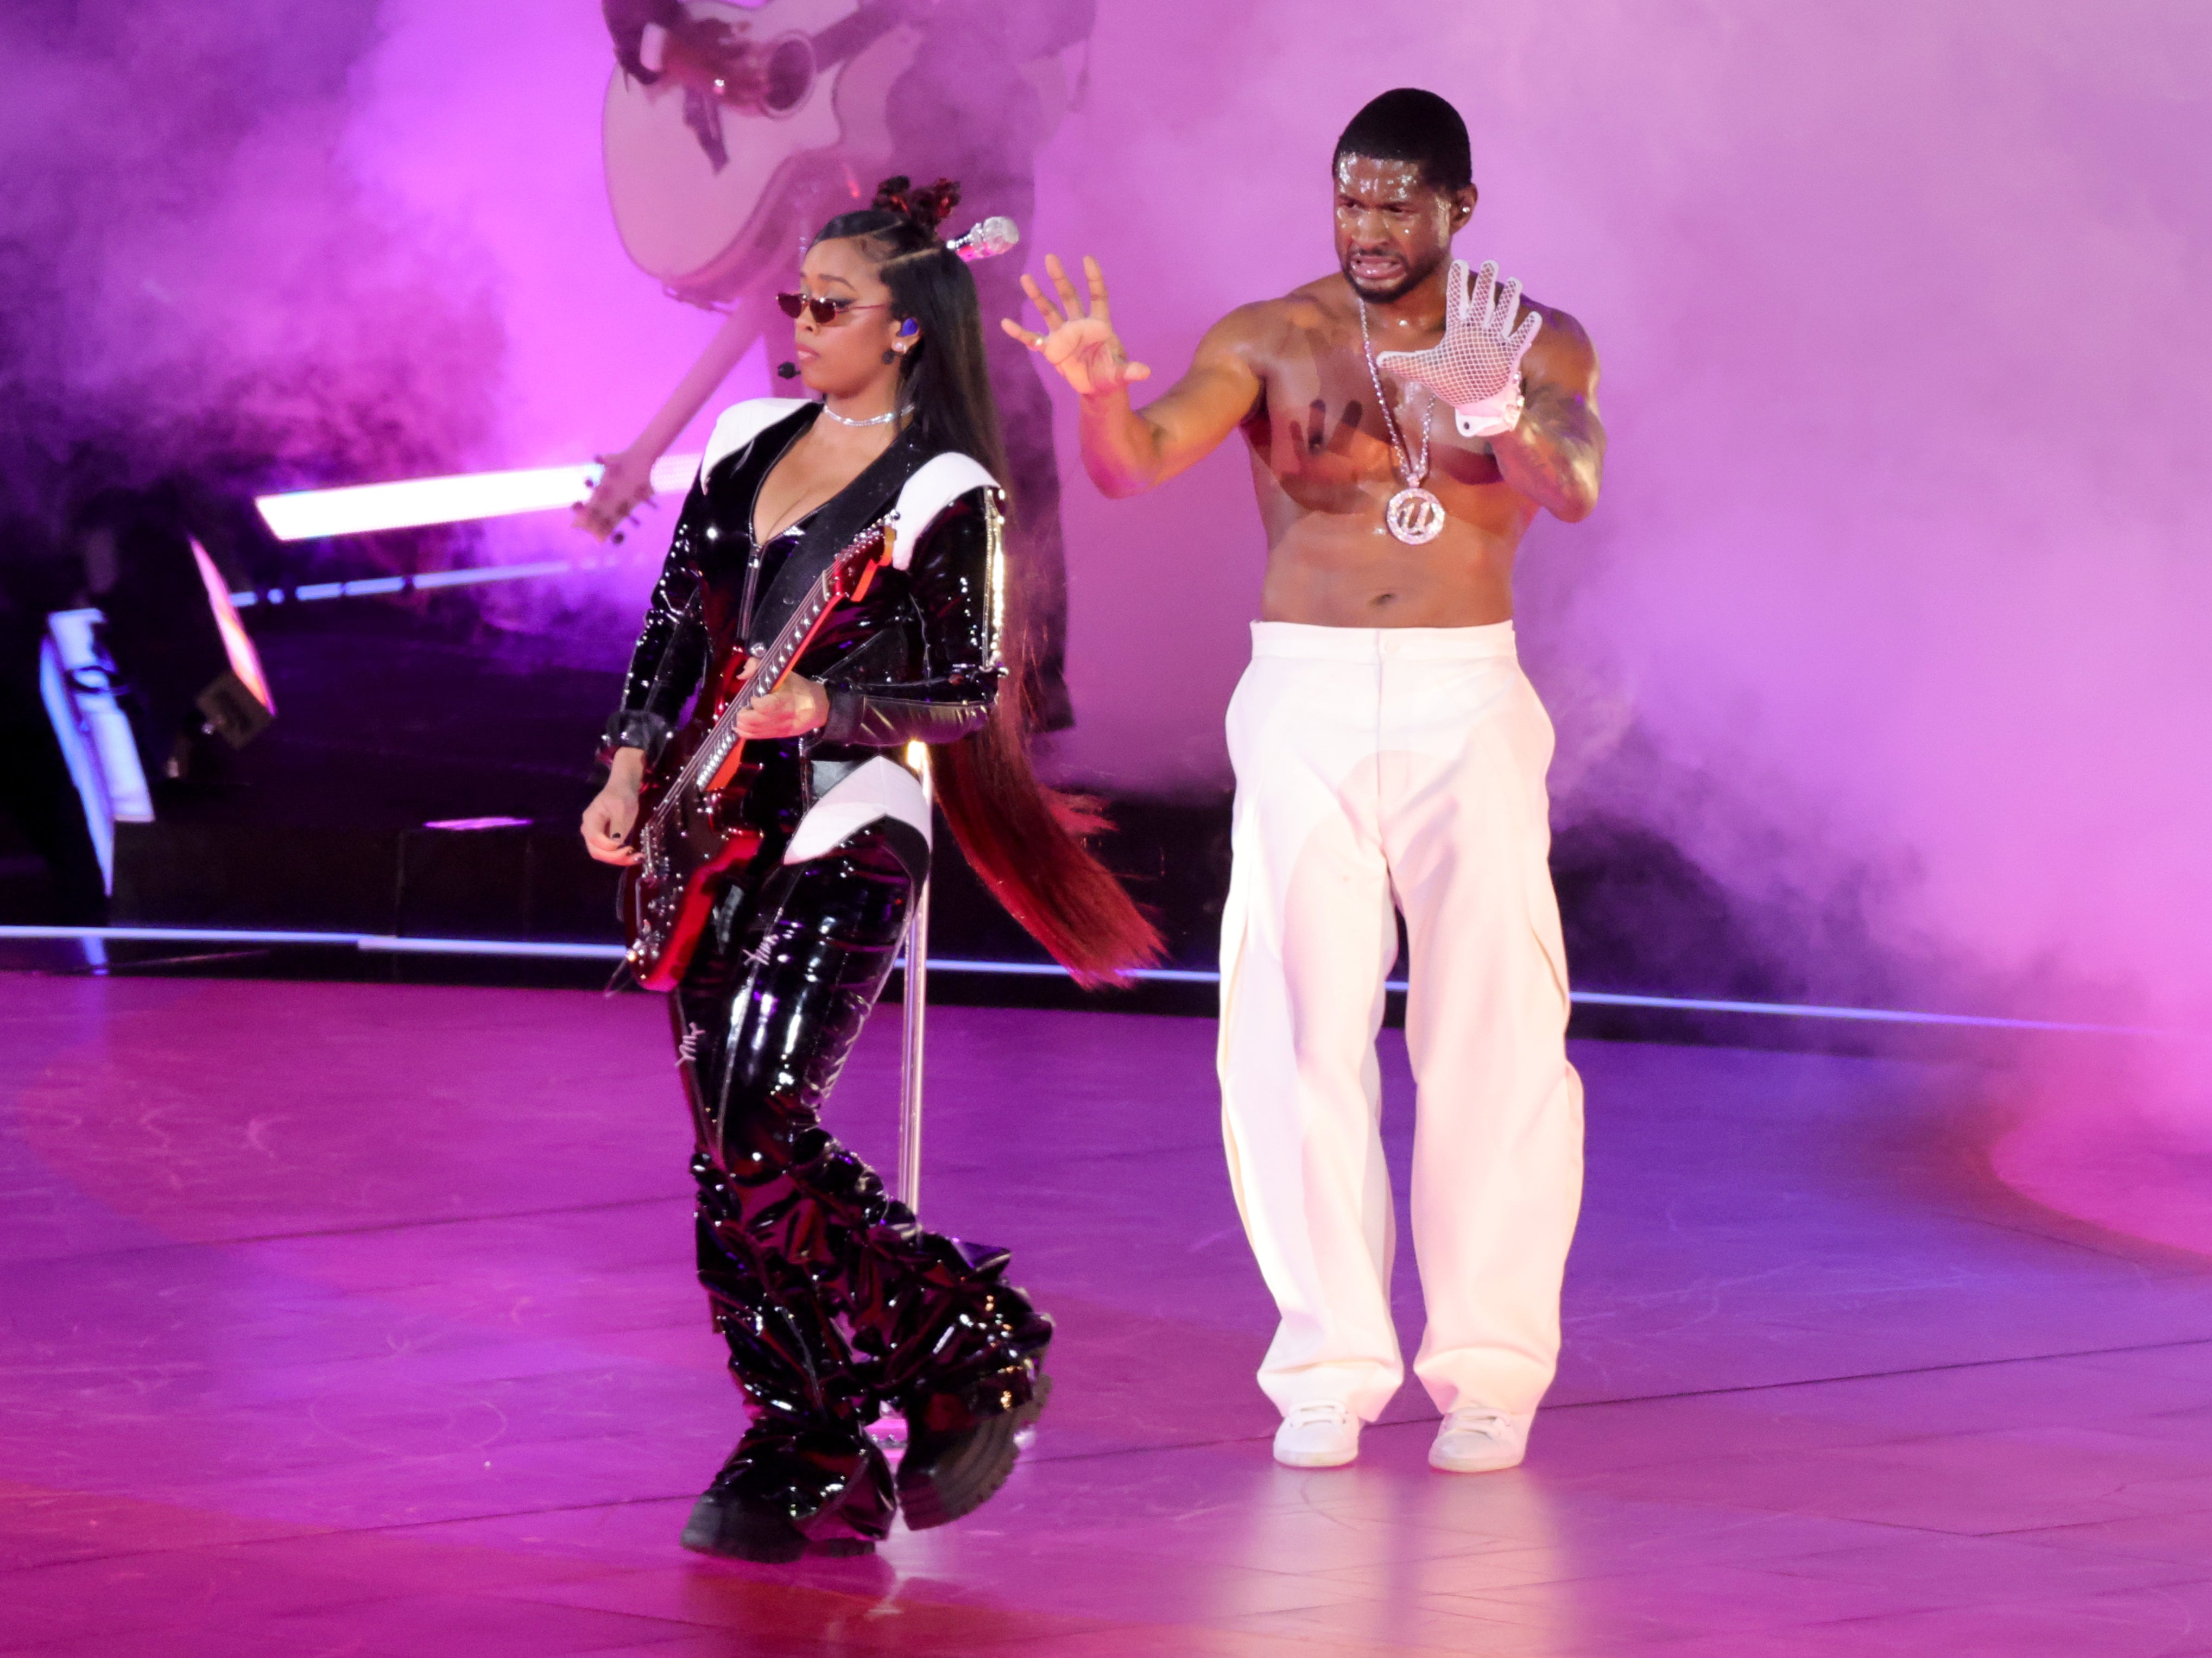 Usher performs with HER during the Super Bowl halftime show